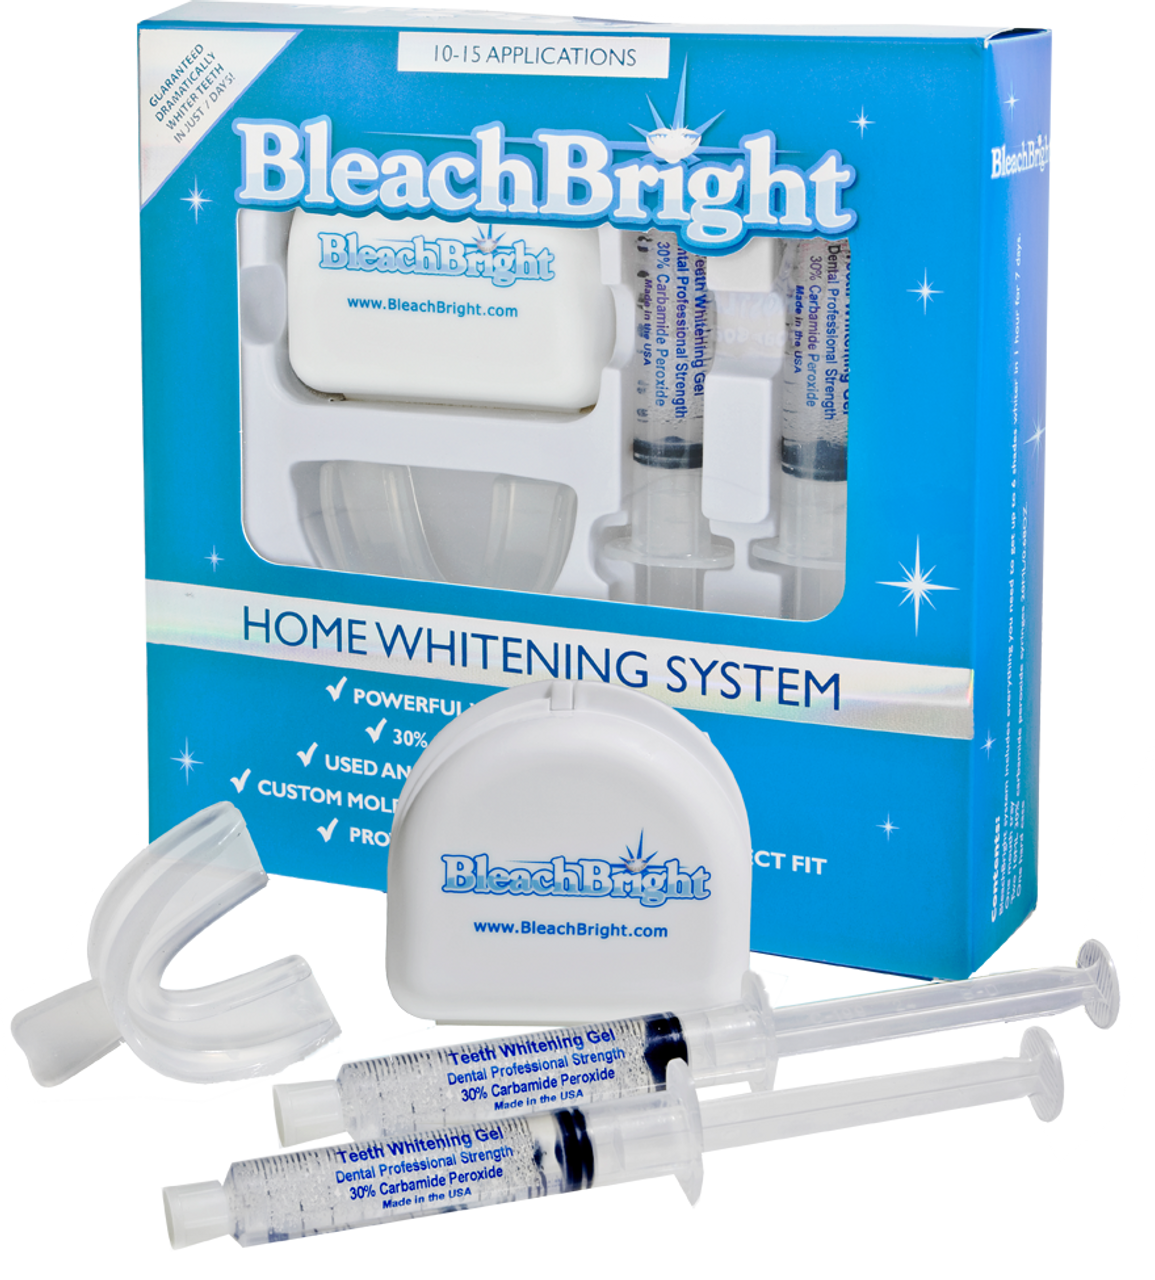 Teeth Whitening Kits - Tray (with LED light) only 